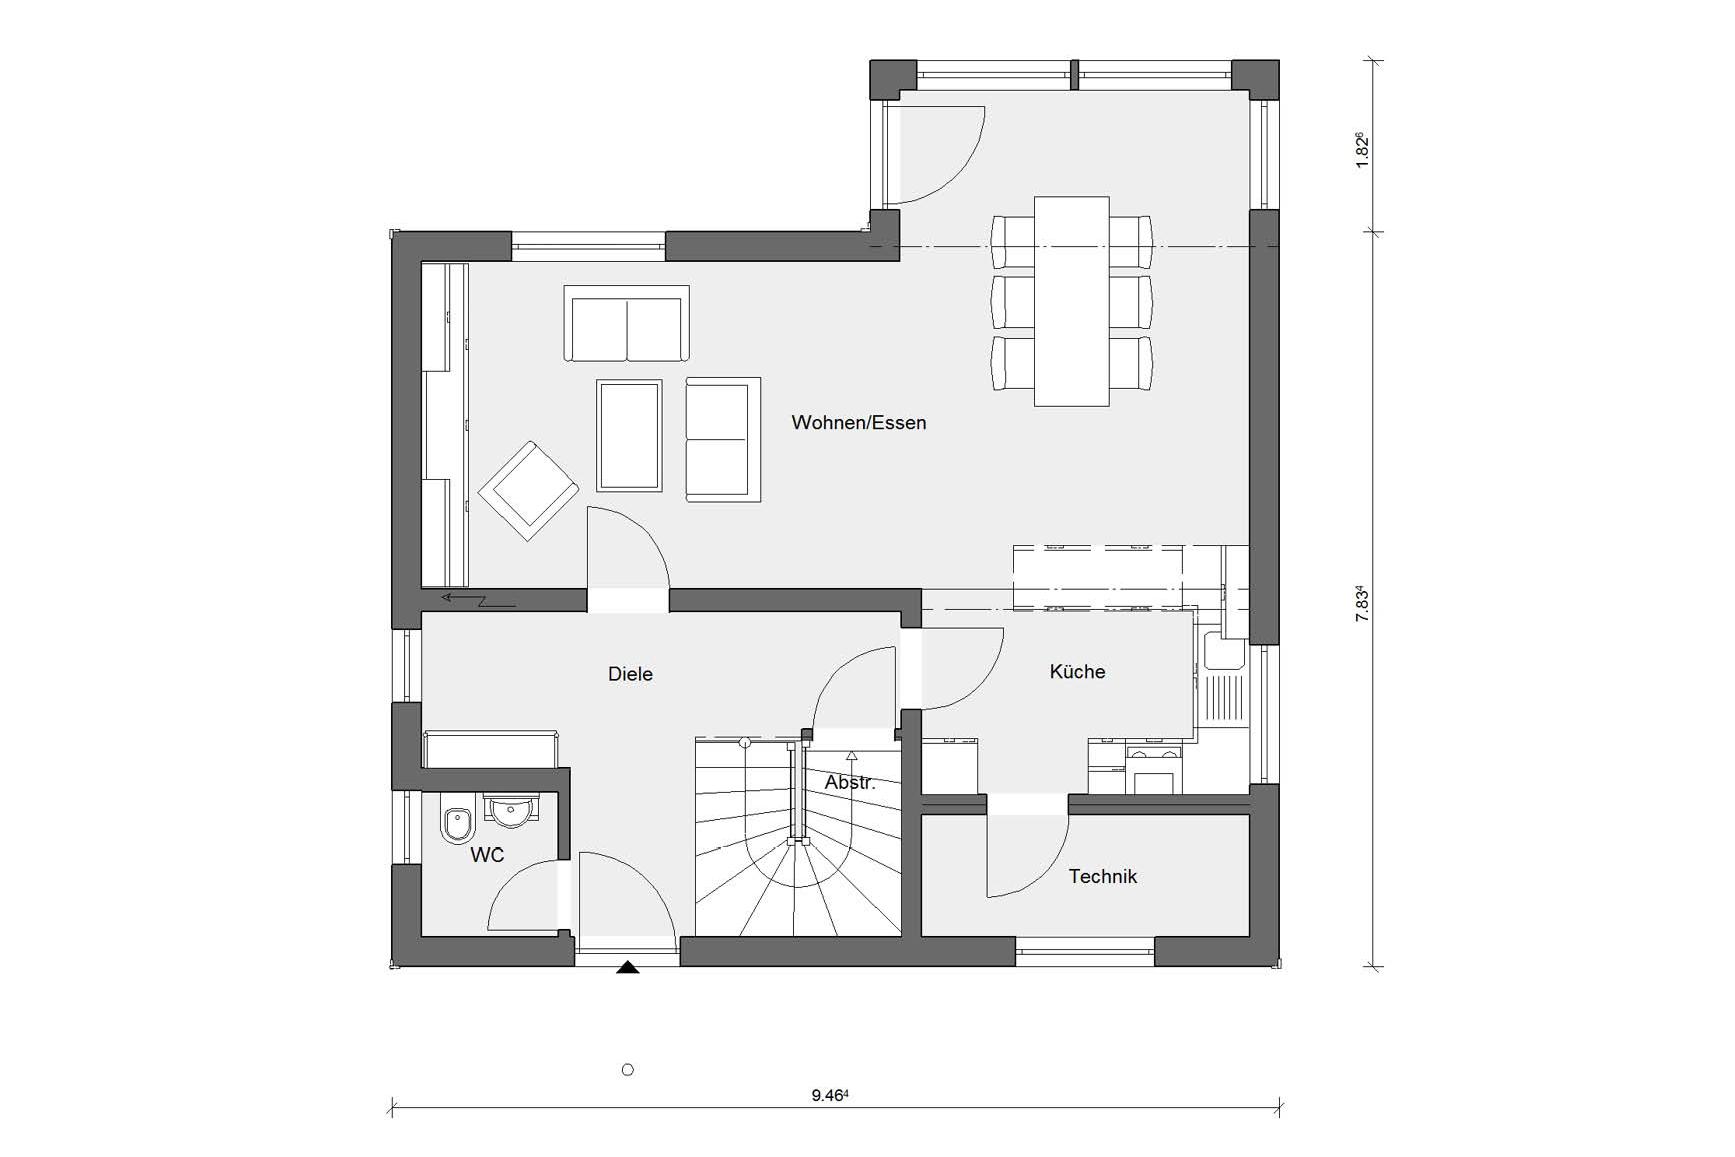 Ground floor plan E 15-127.10 Bay window at the house